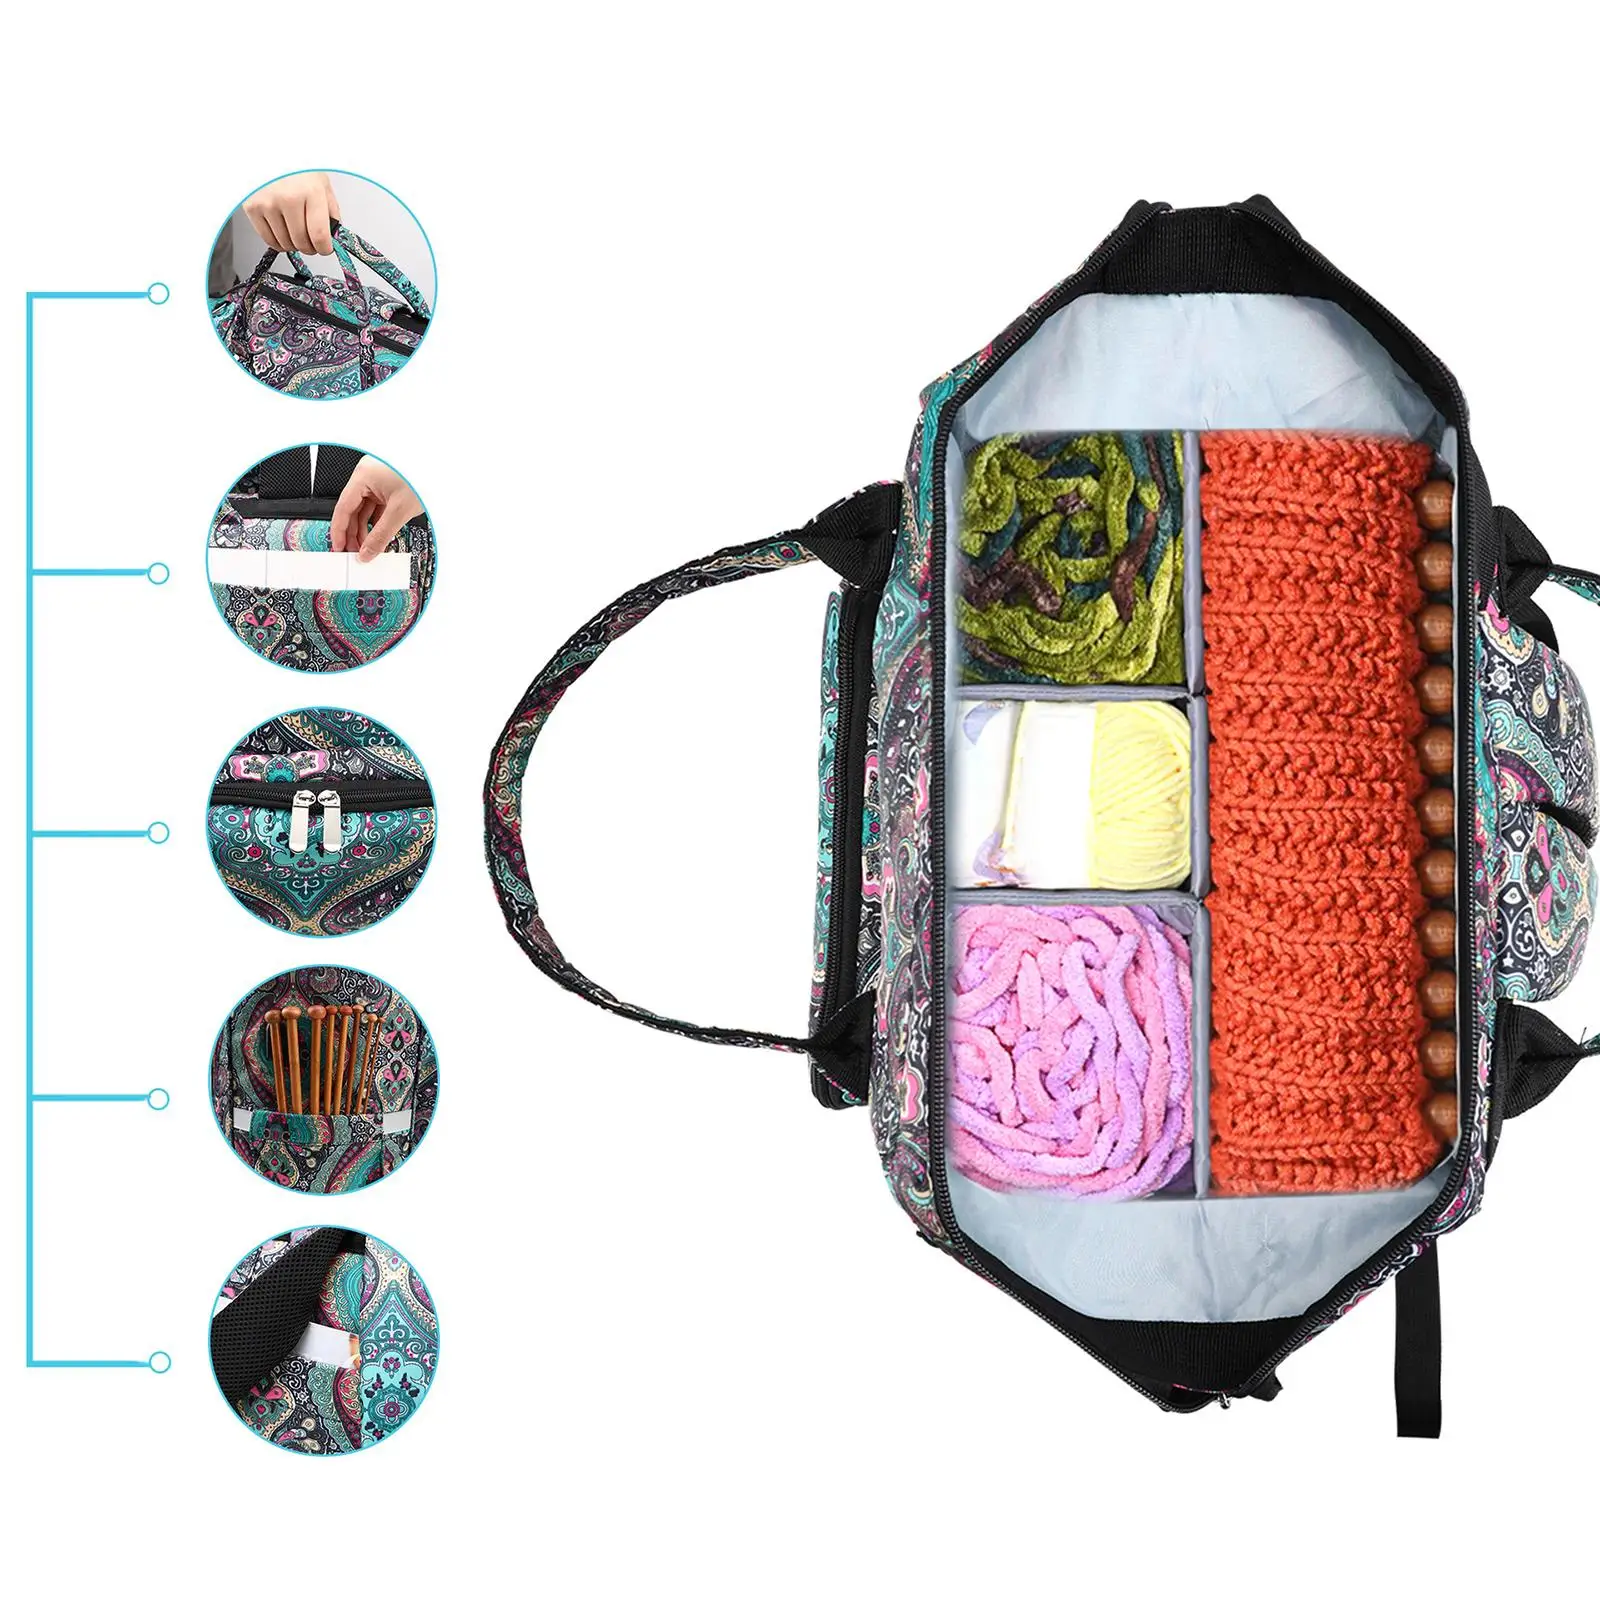 Crochet Backpack Nylon Equipment Multi Pockets Storage Tote Bag for Camping Knitting Needle Carrying Projects Home Sewing Tools